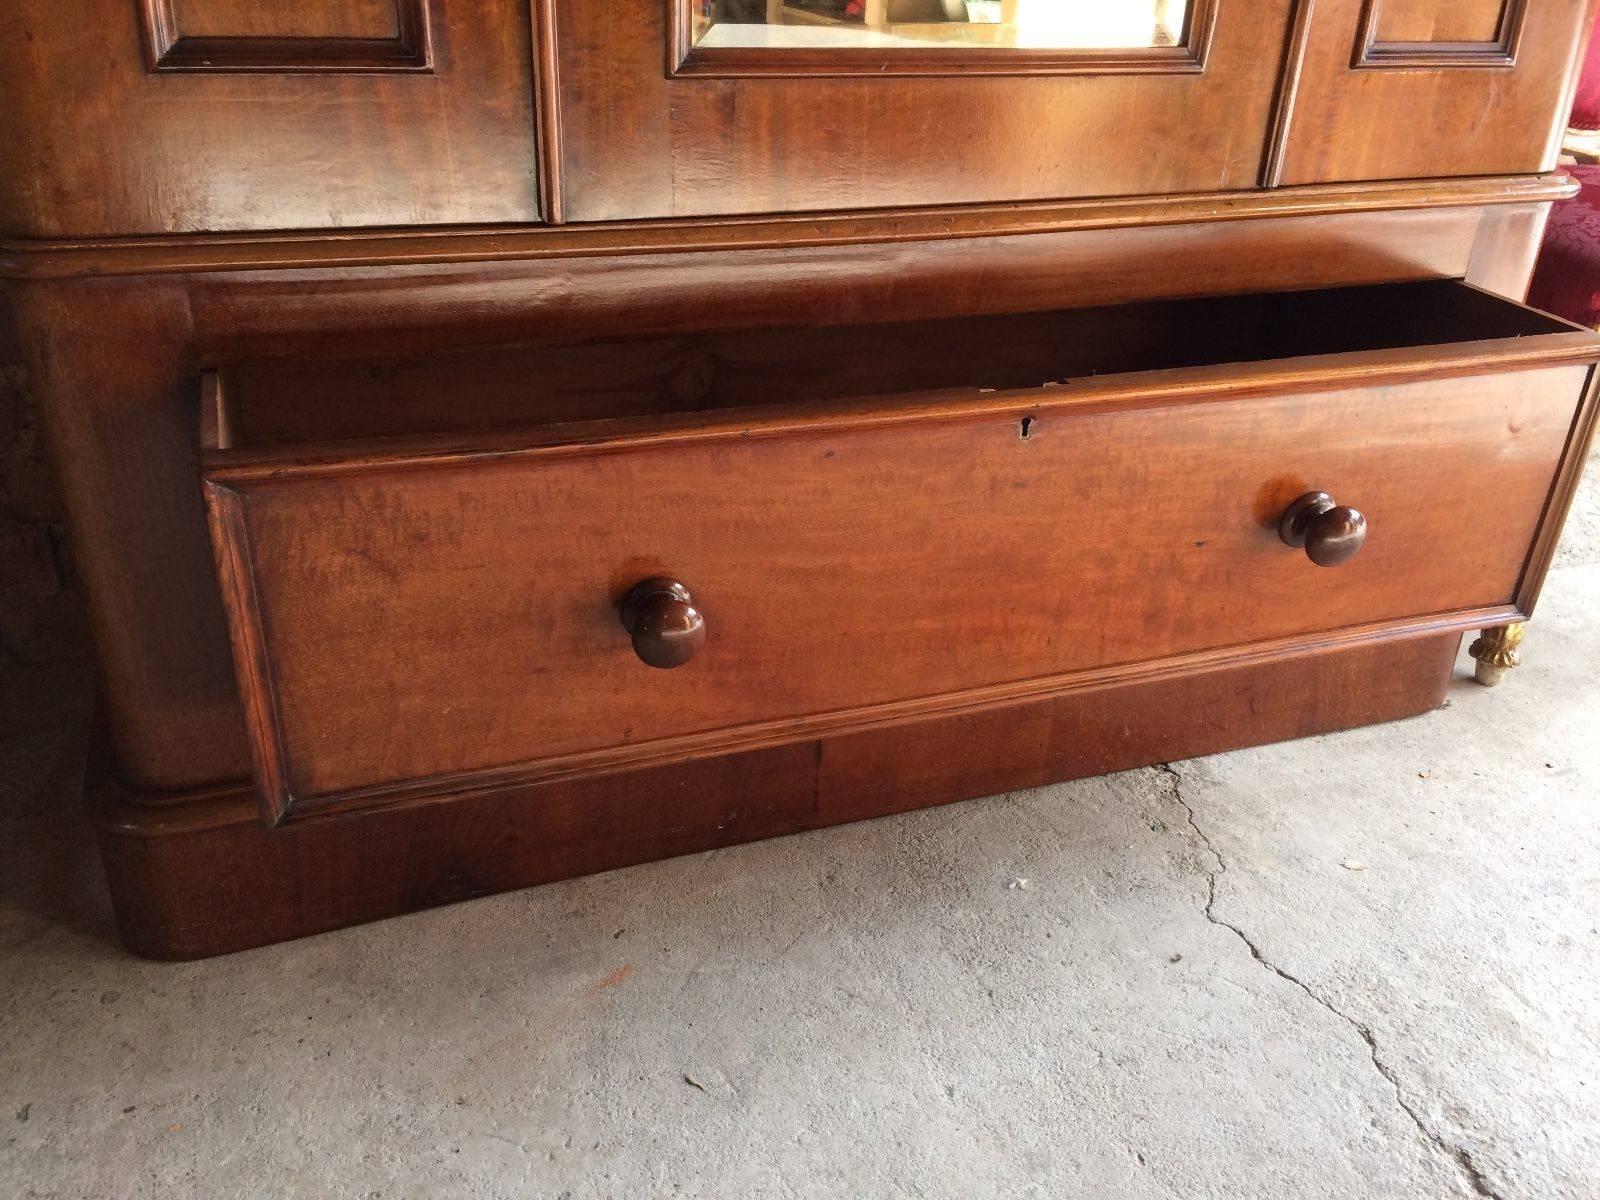 A Victorian mahogany mirror fronted wardrobe, with cornice to top over single mirror door with bevelled glass, hanging rail with hooks inside, below single pull-out double drawer with original knob handles, comes with key and tassel (non working),